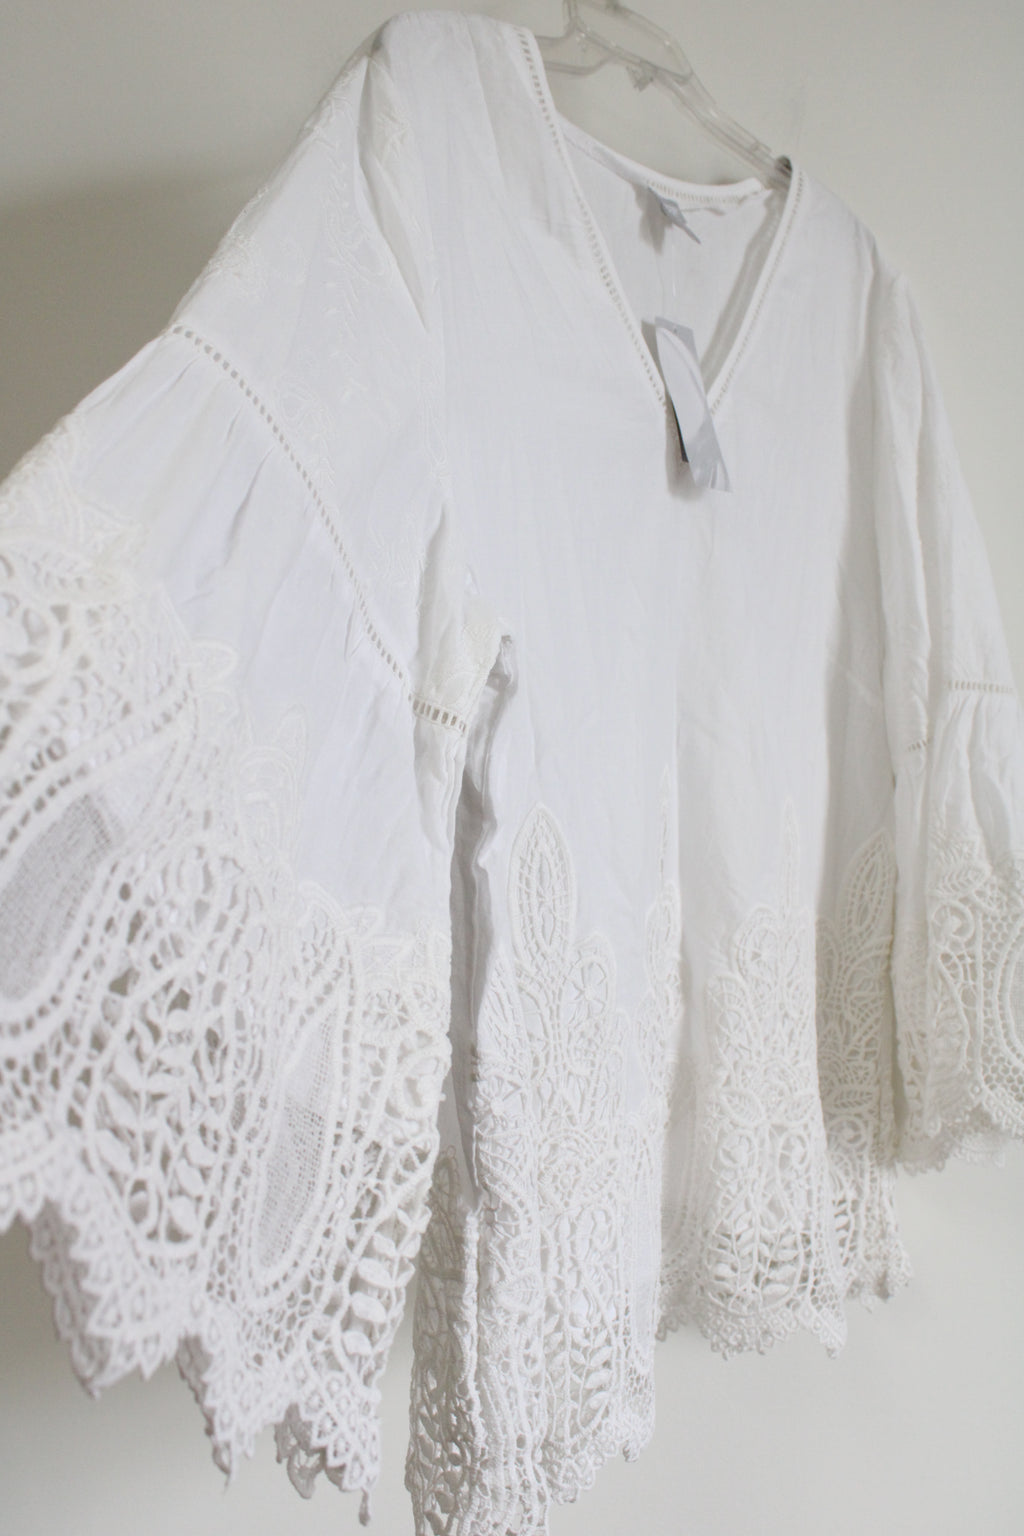 NEW Chico's White Cotton Flare Sleeve Top | 4 (20/22)